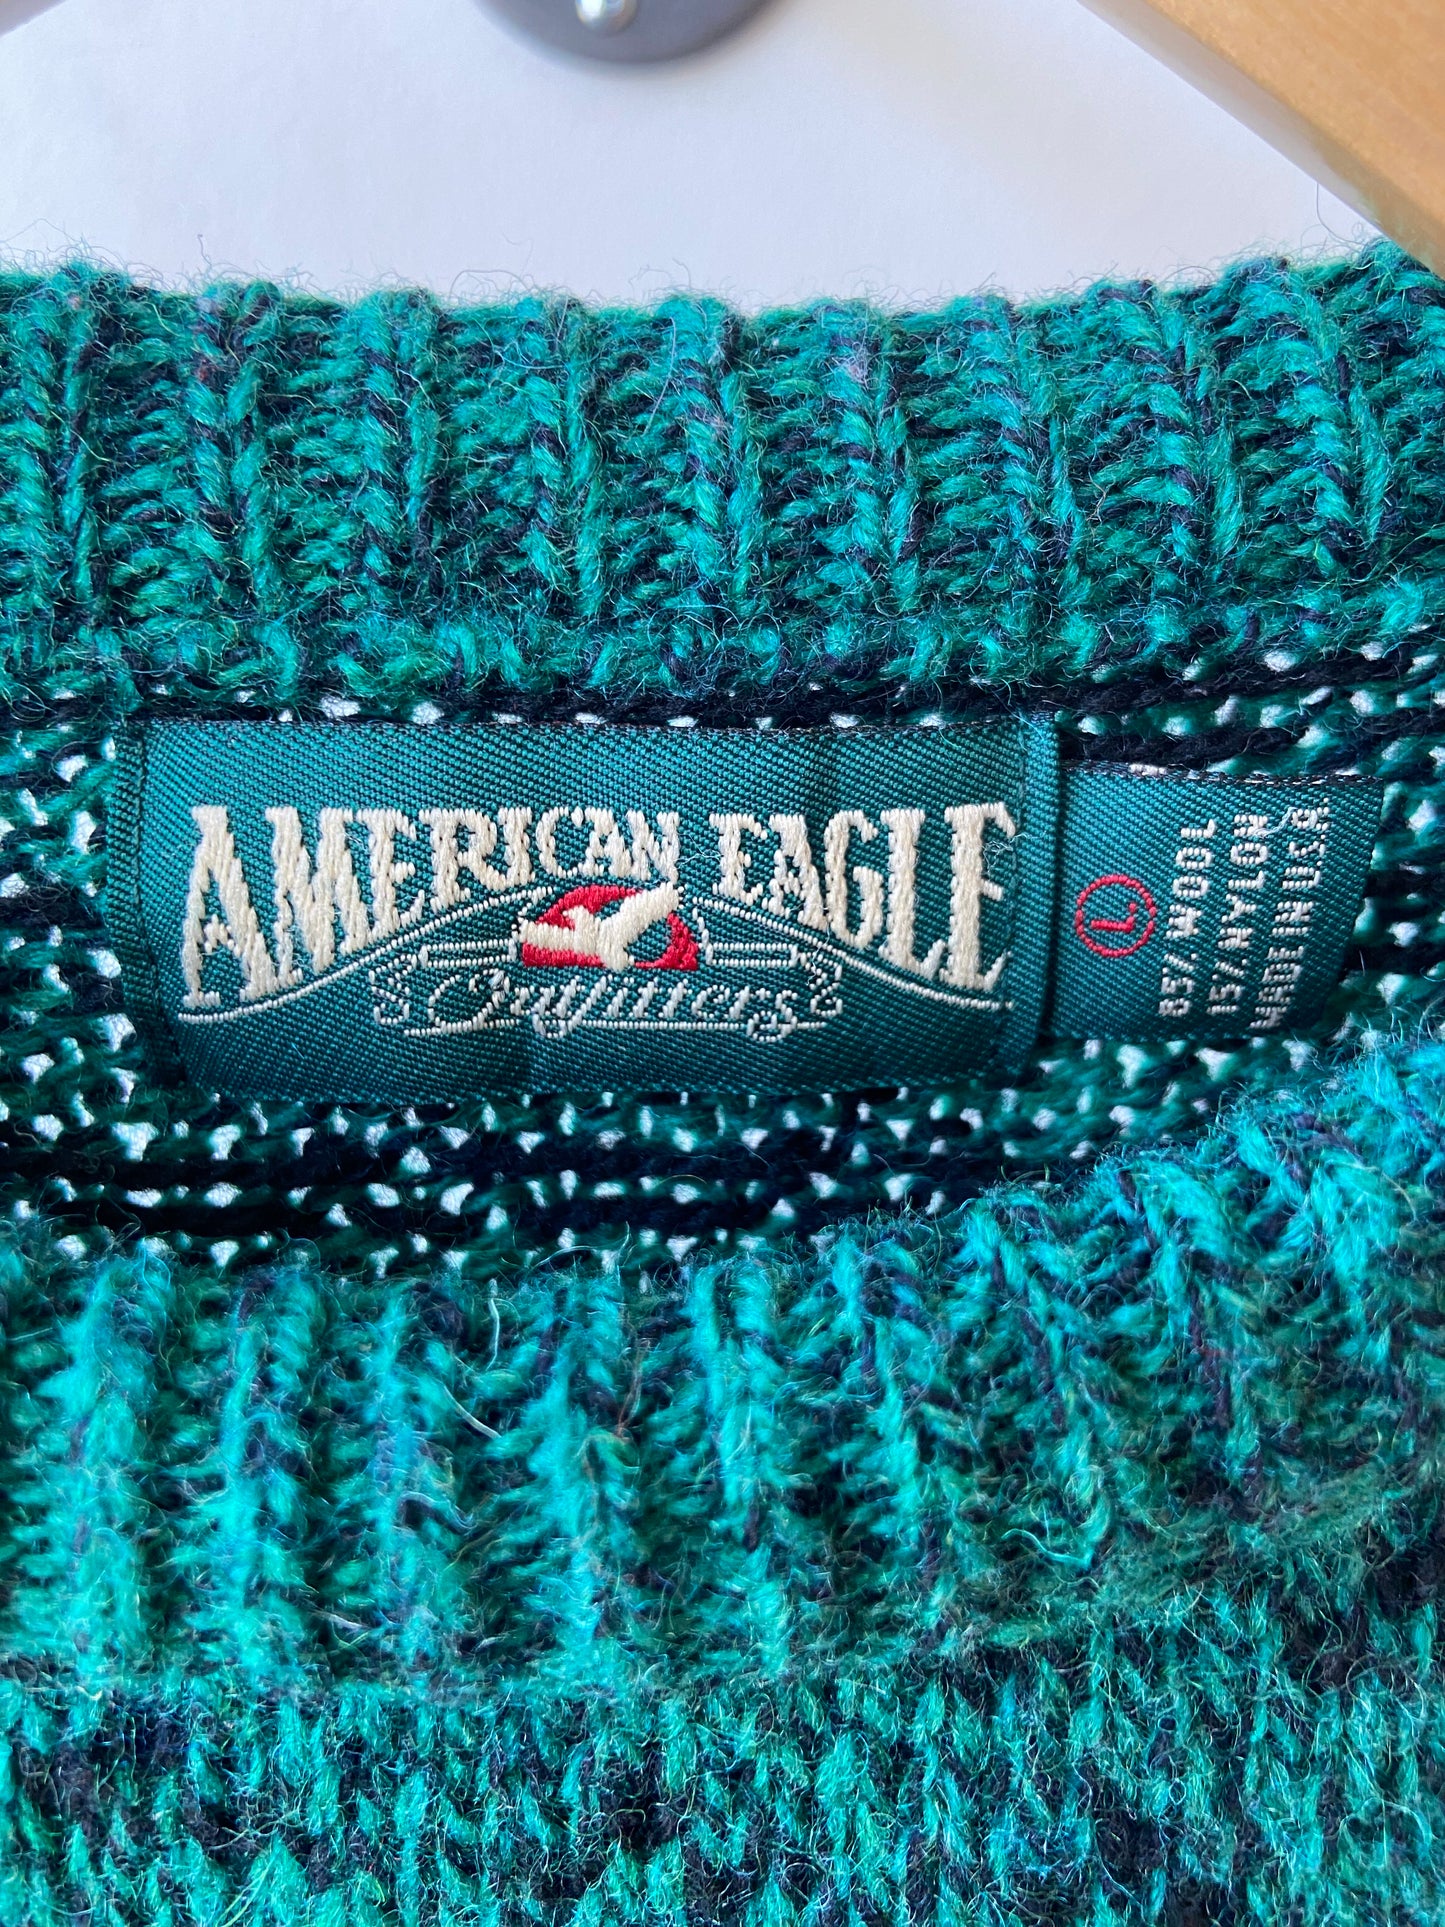 Green American Eagle Knit Sweater